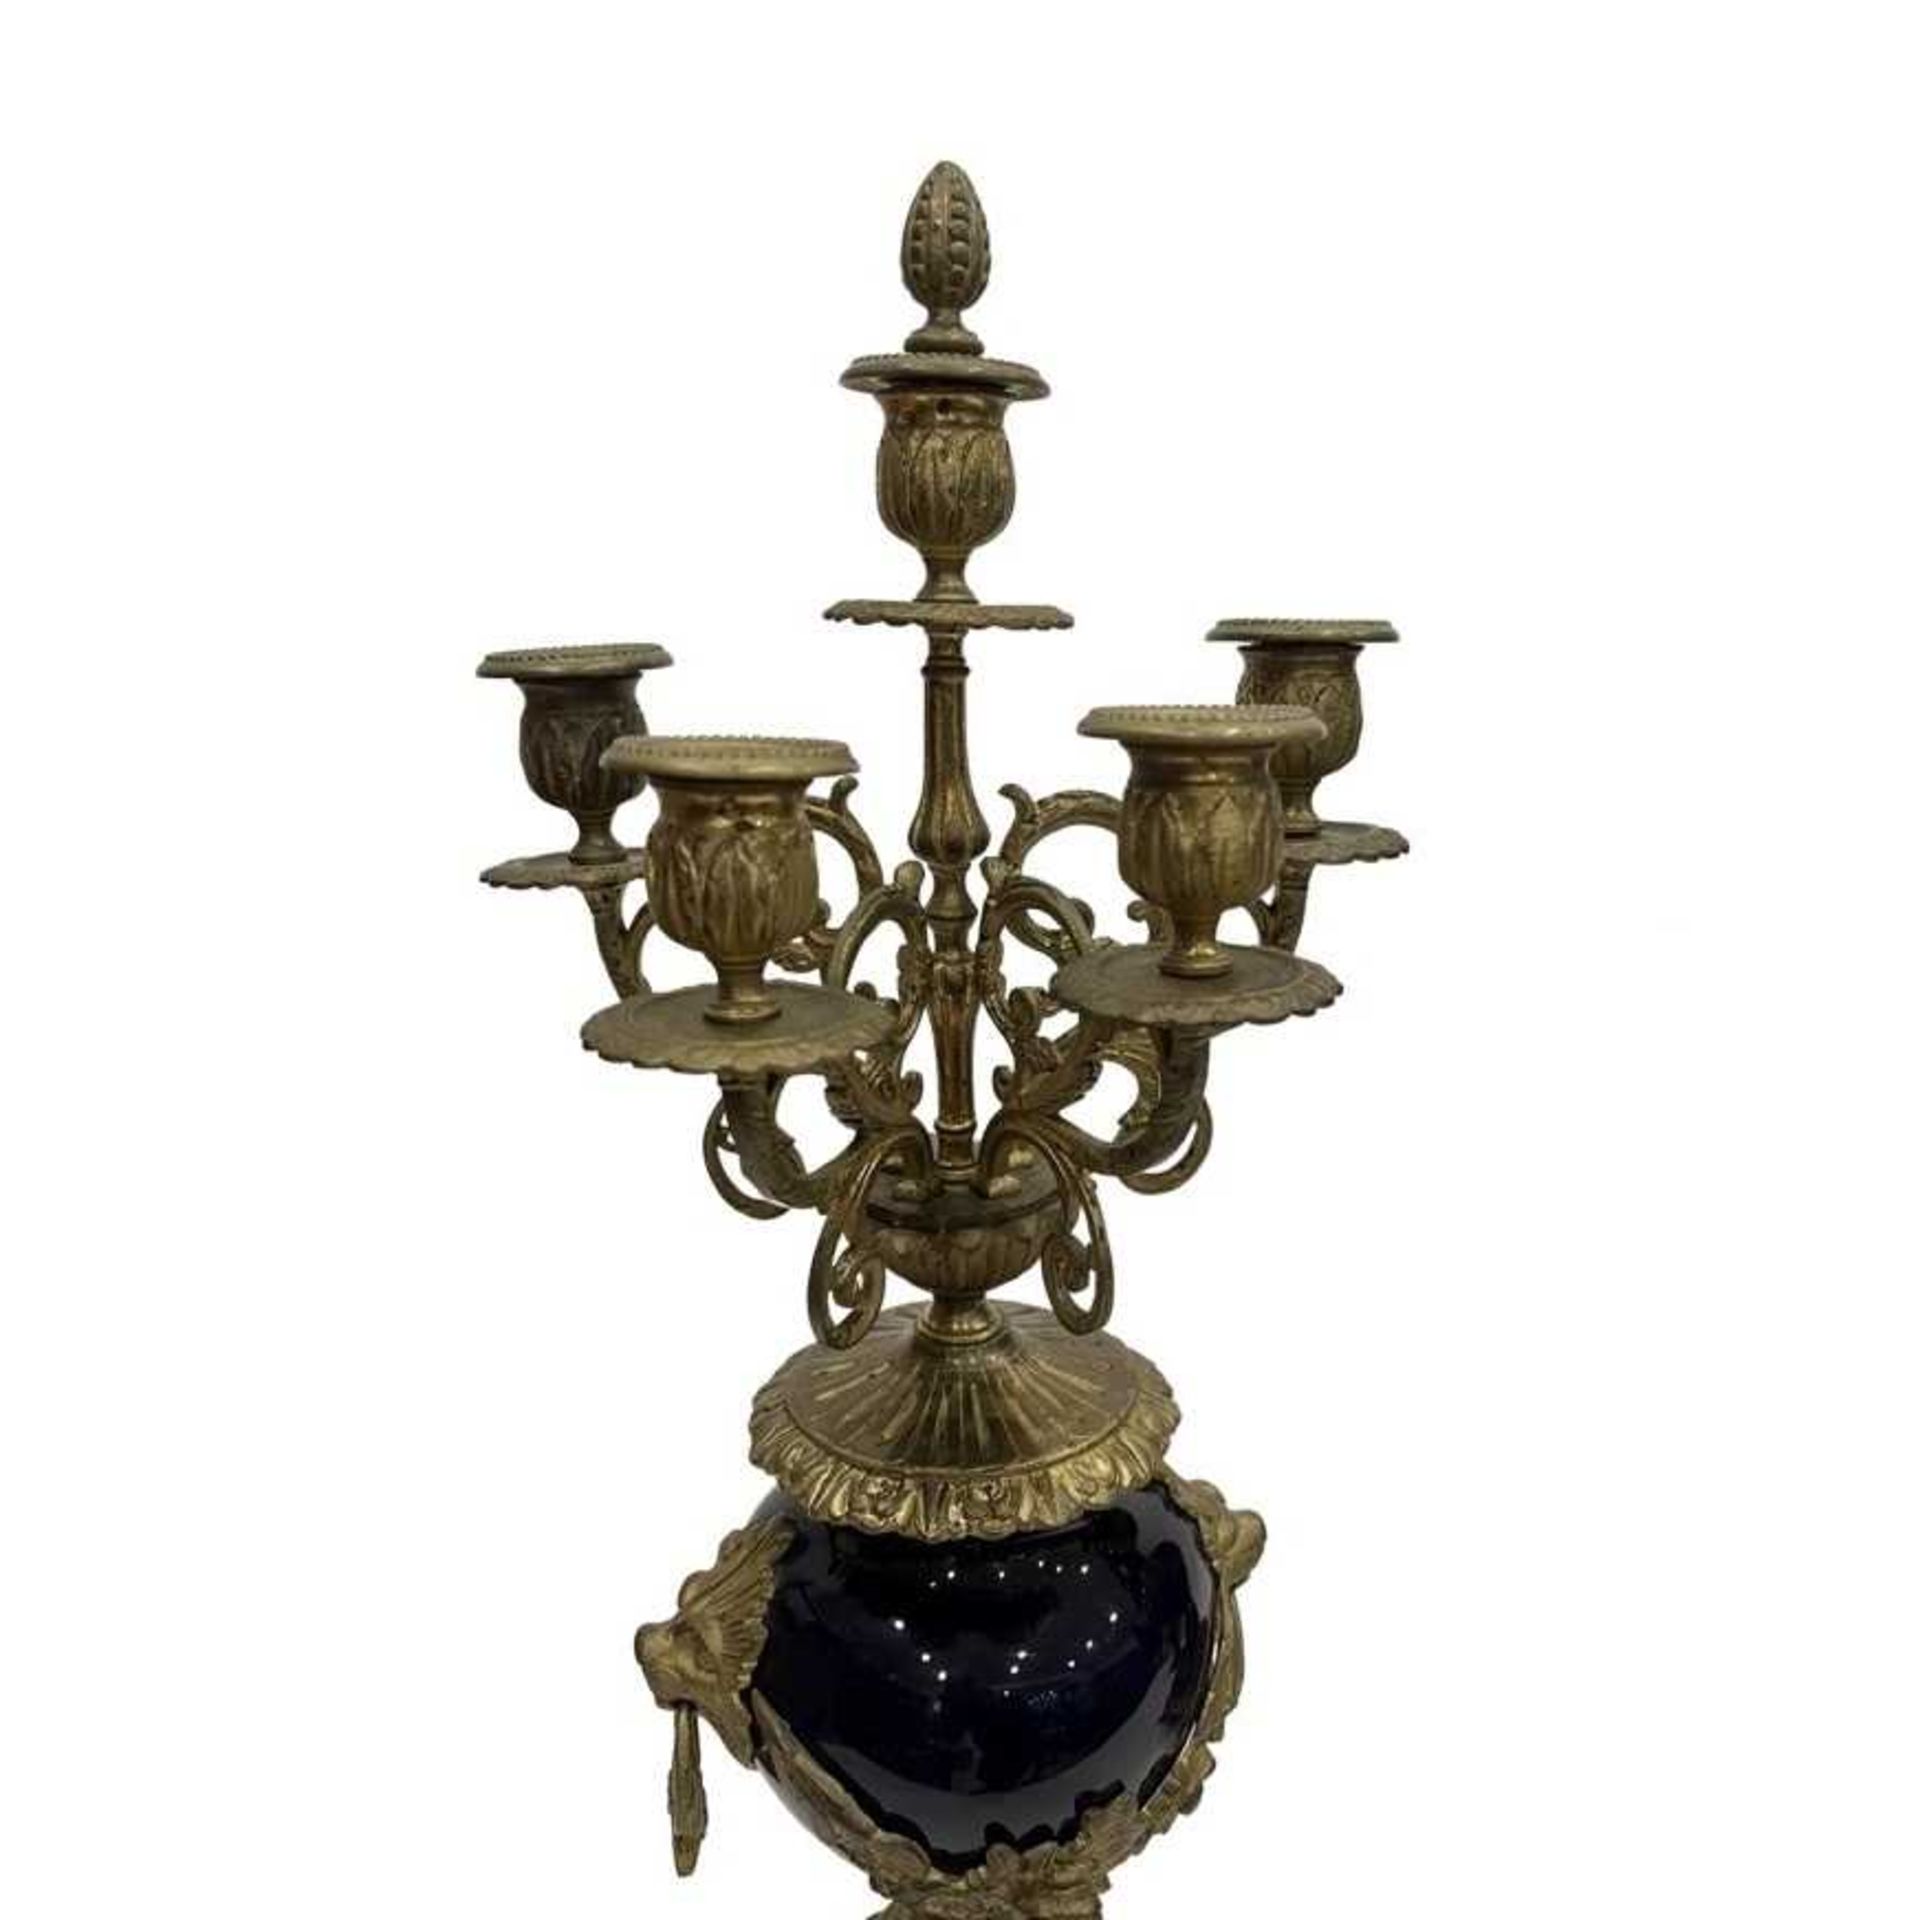 A LATE 19TH CENTURY FRENCH PORCELAIN AND GILT BRONZE MOUNTED CLOCK GARNITURE - Image 2 of 4